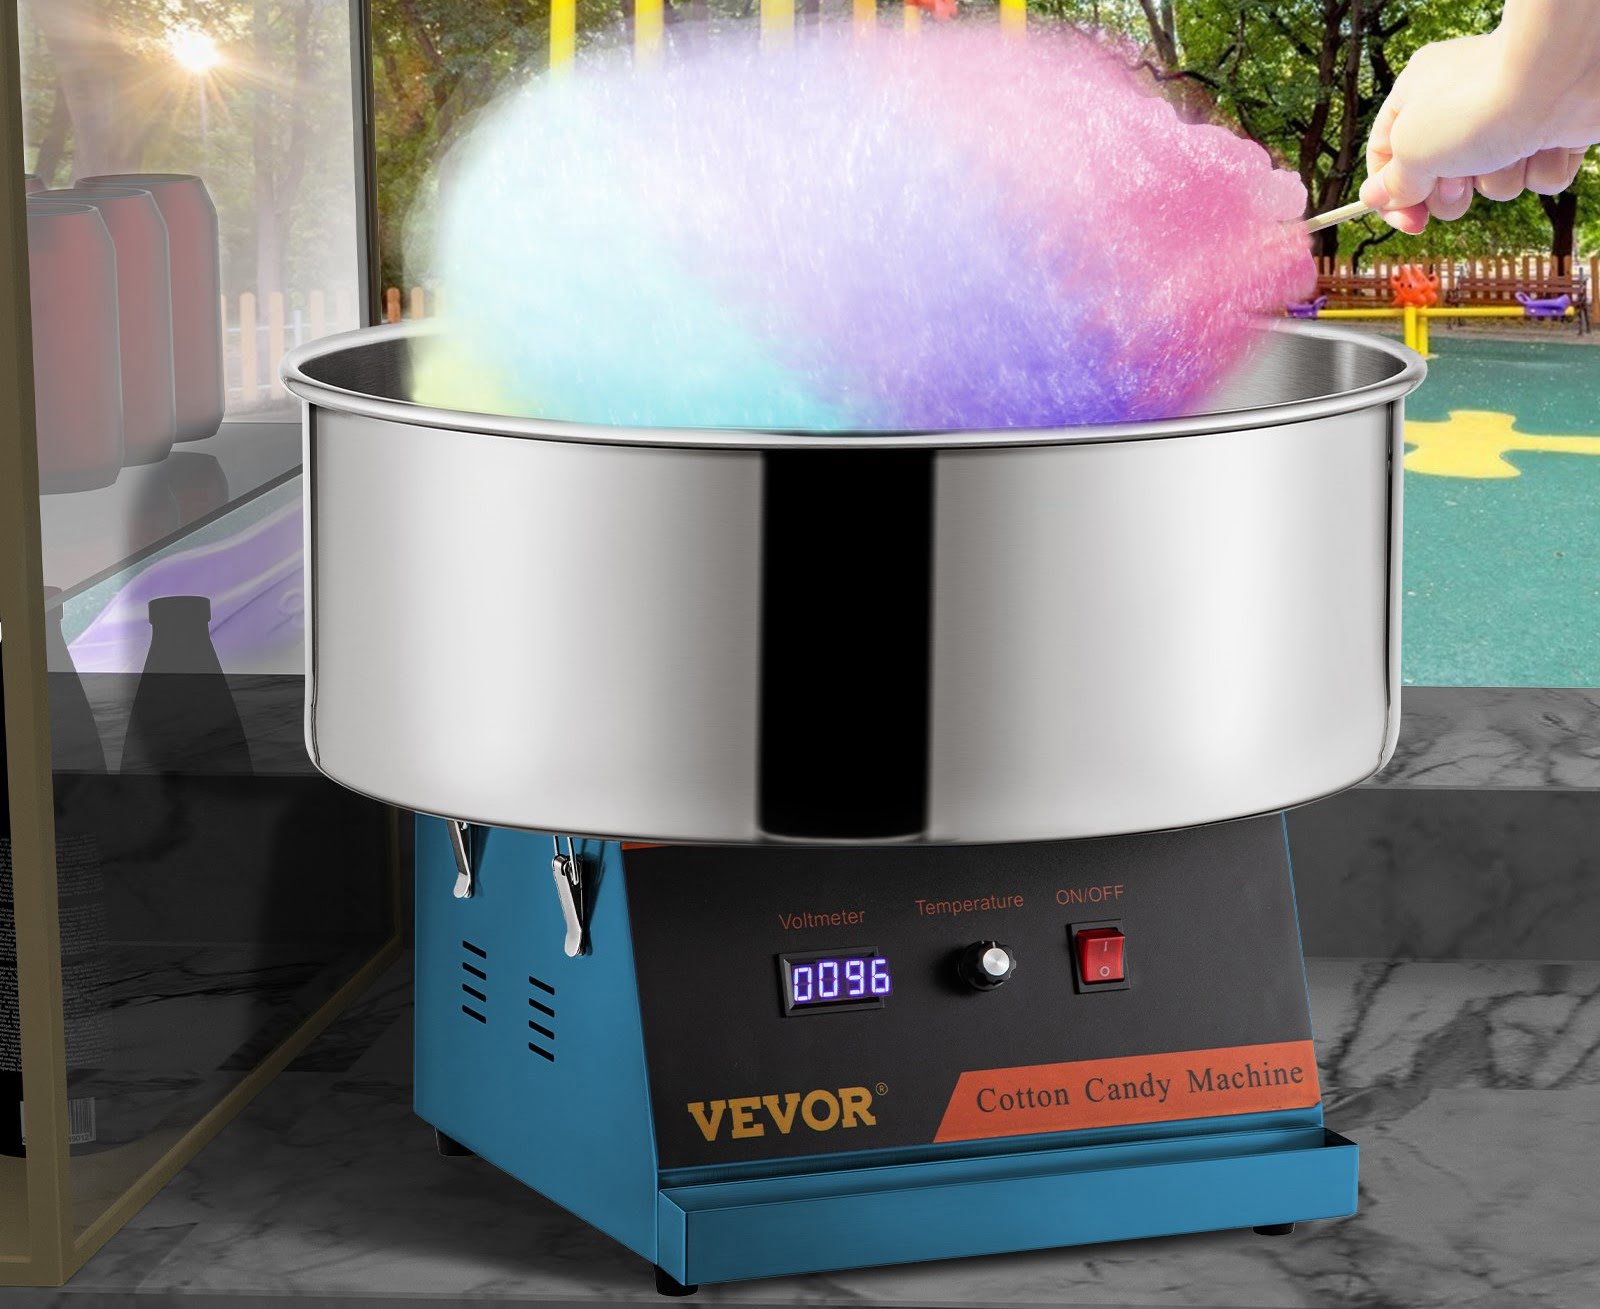 How To Clean Burnt VEVOR Sugar Off Cotton Candy Machine